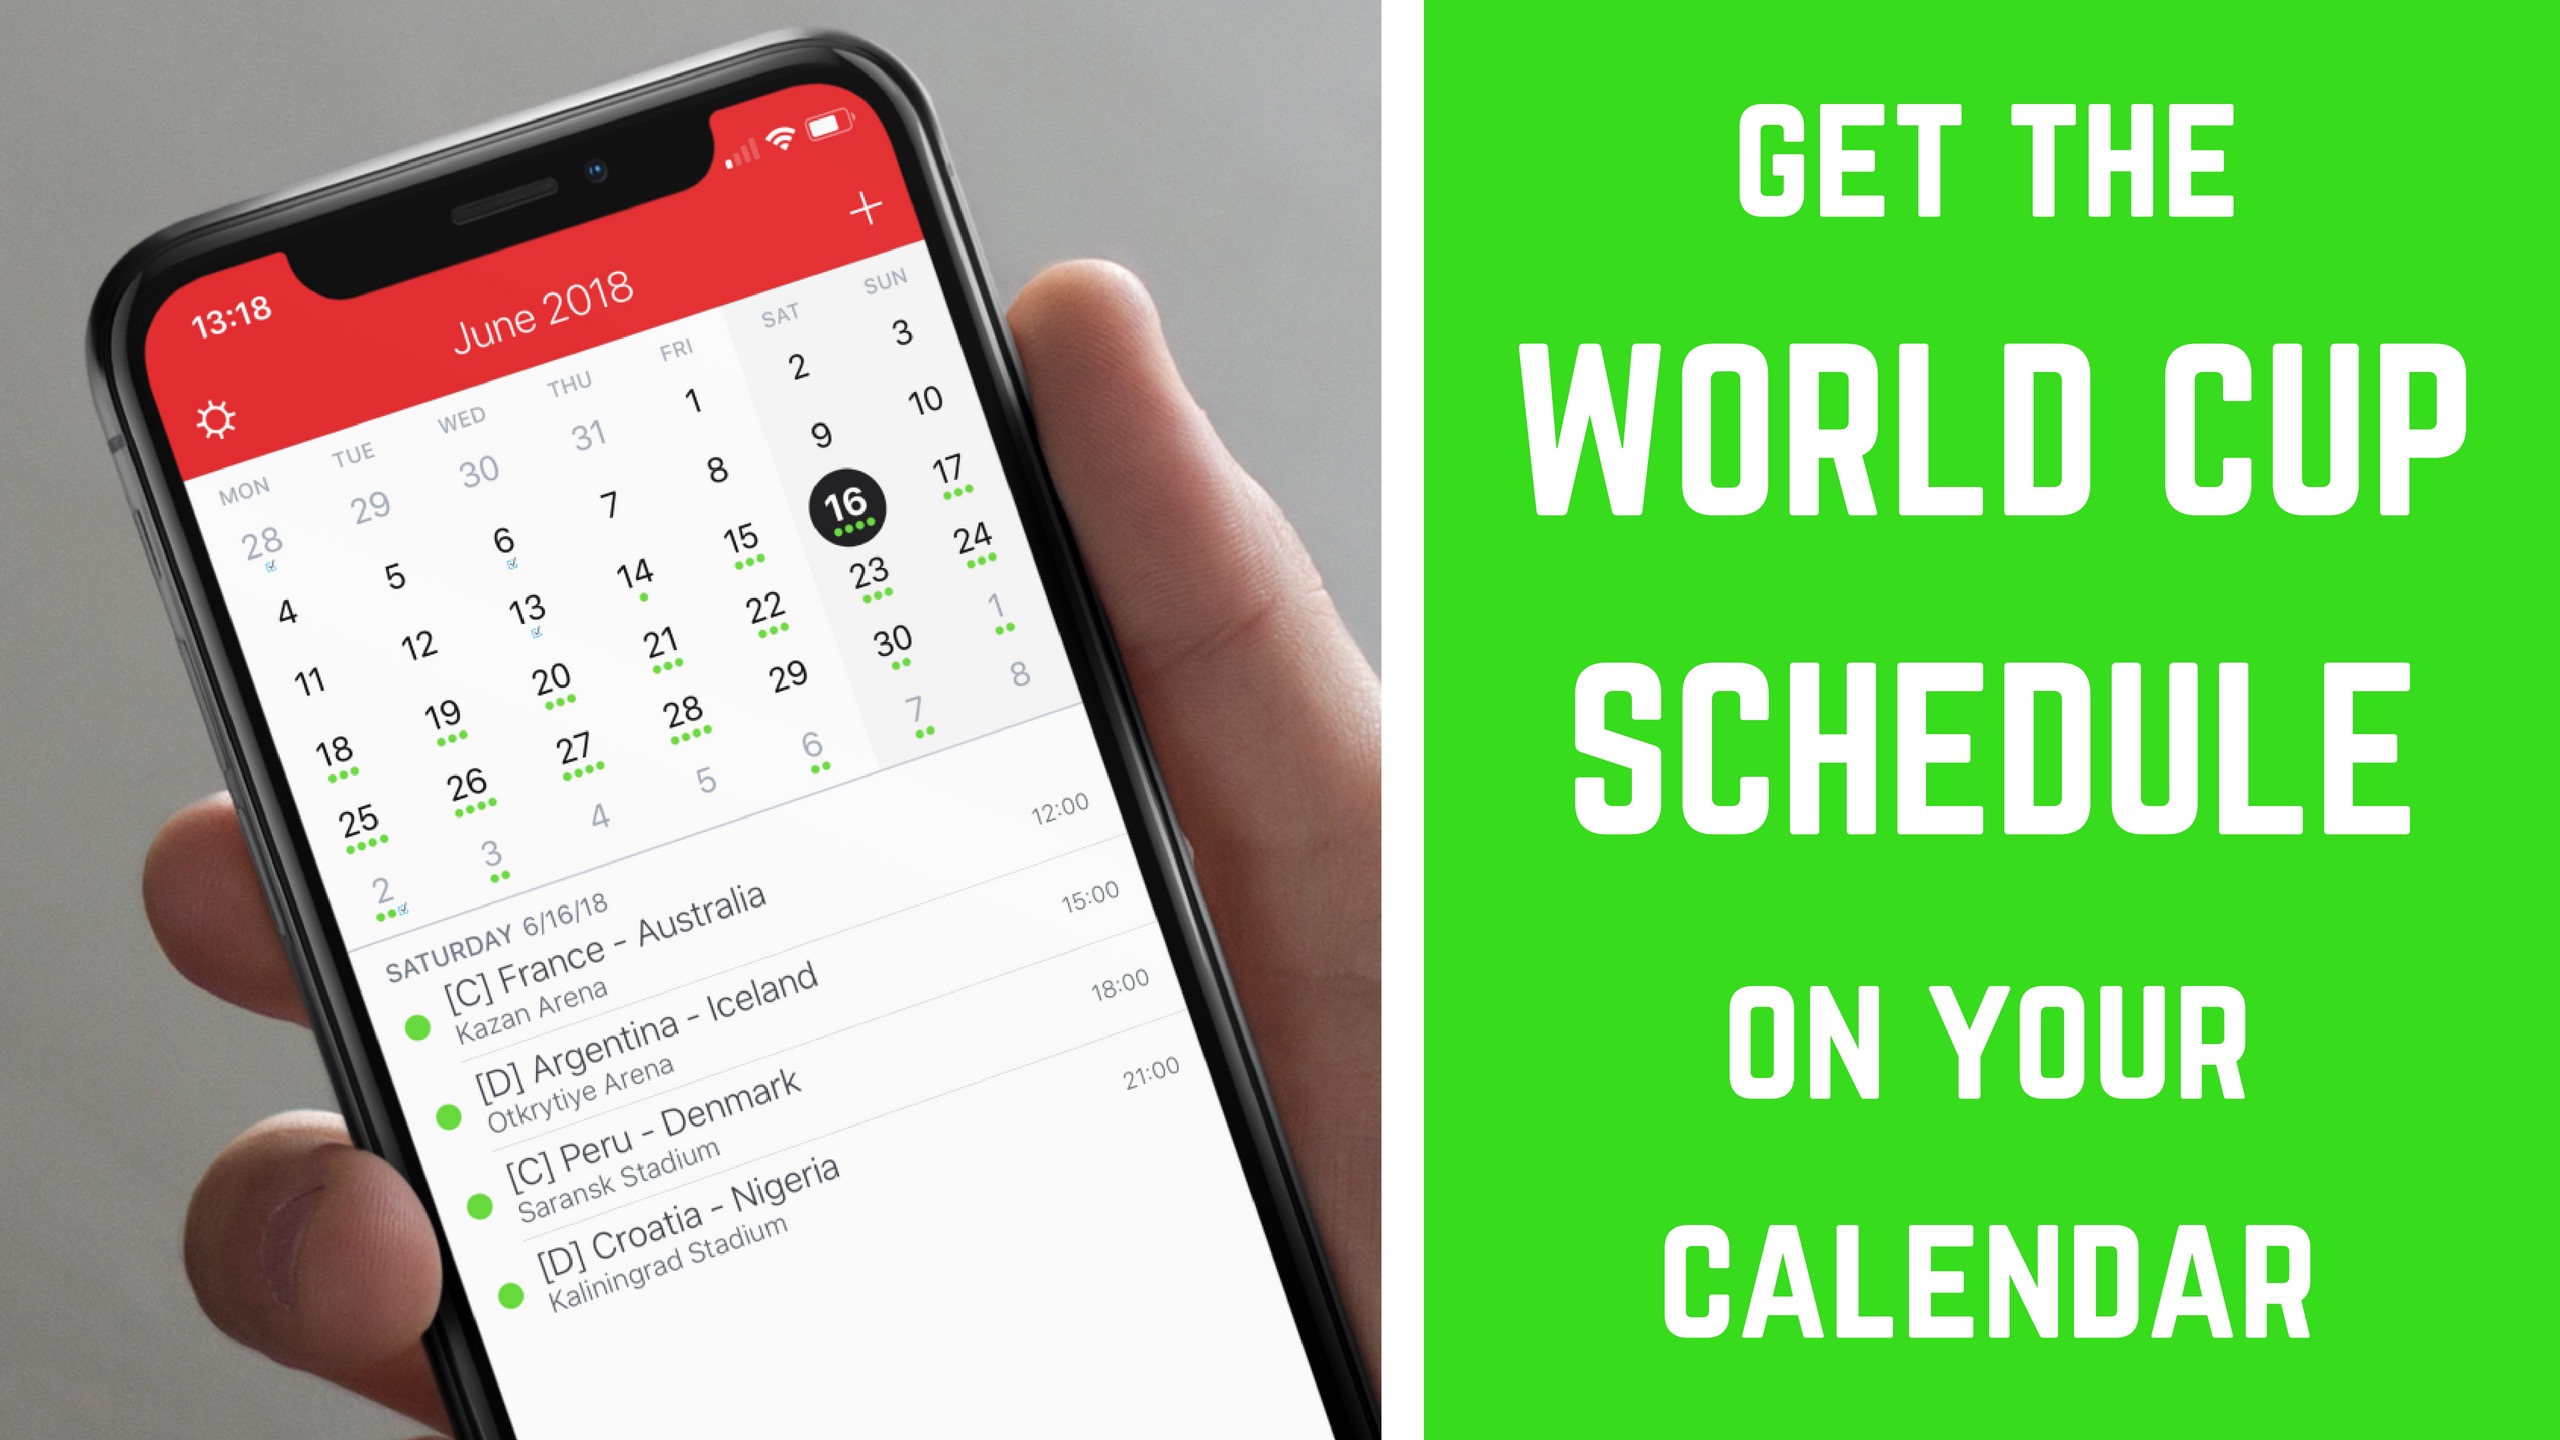 Get the 2018 FIFA World Cup schedule on your calendar